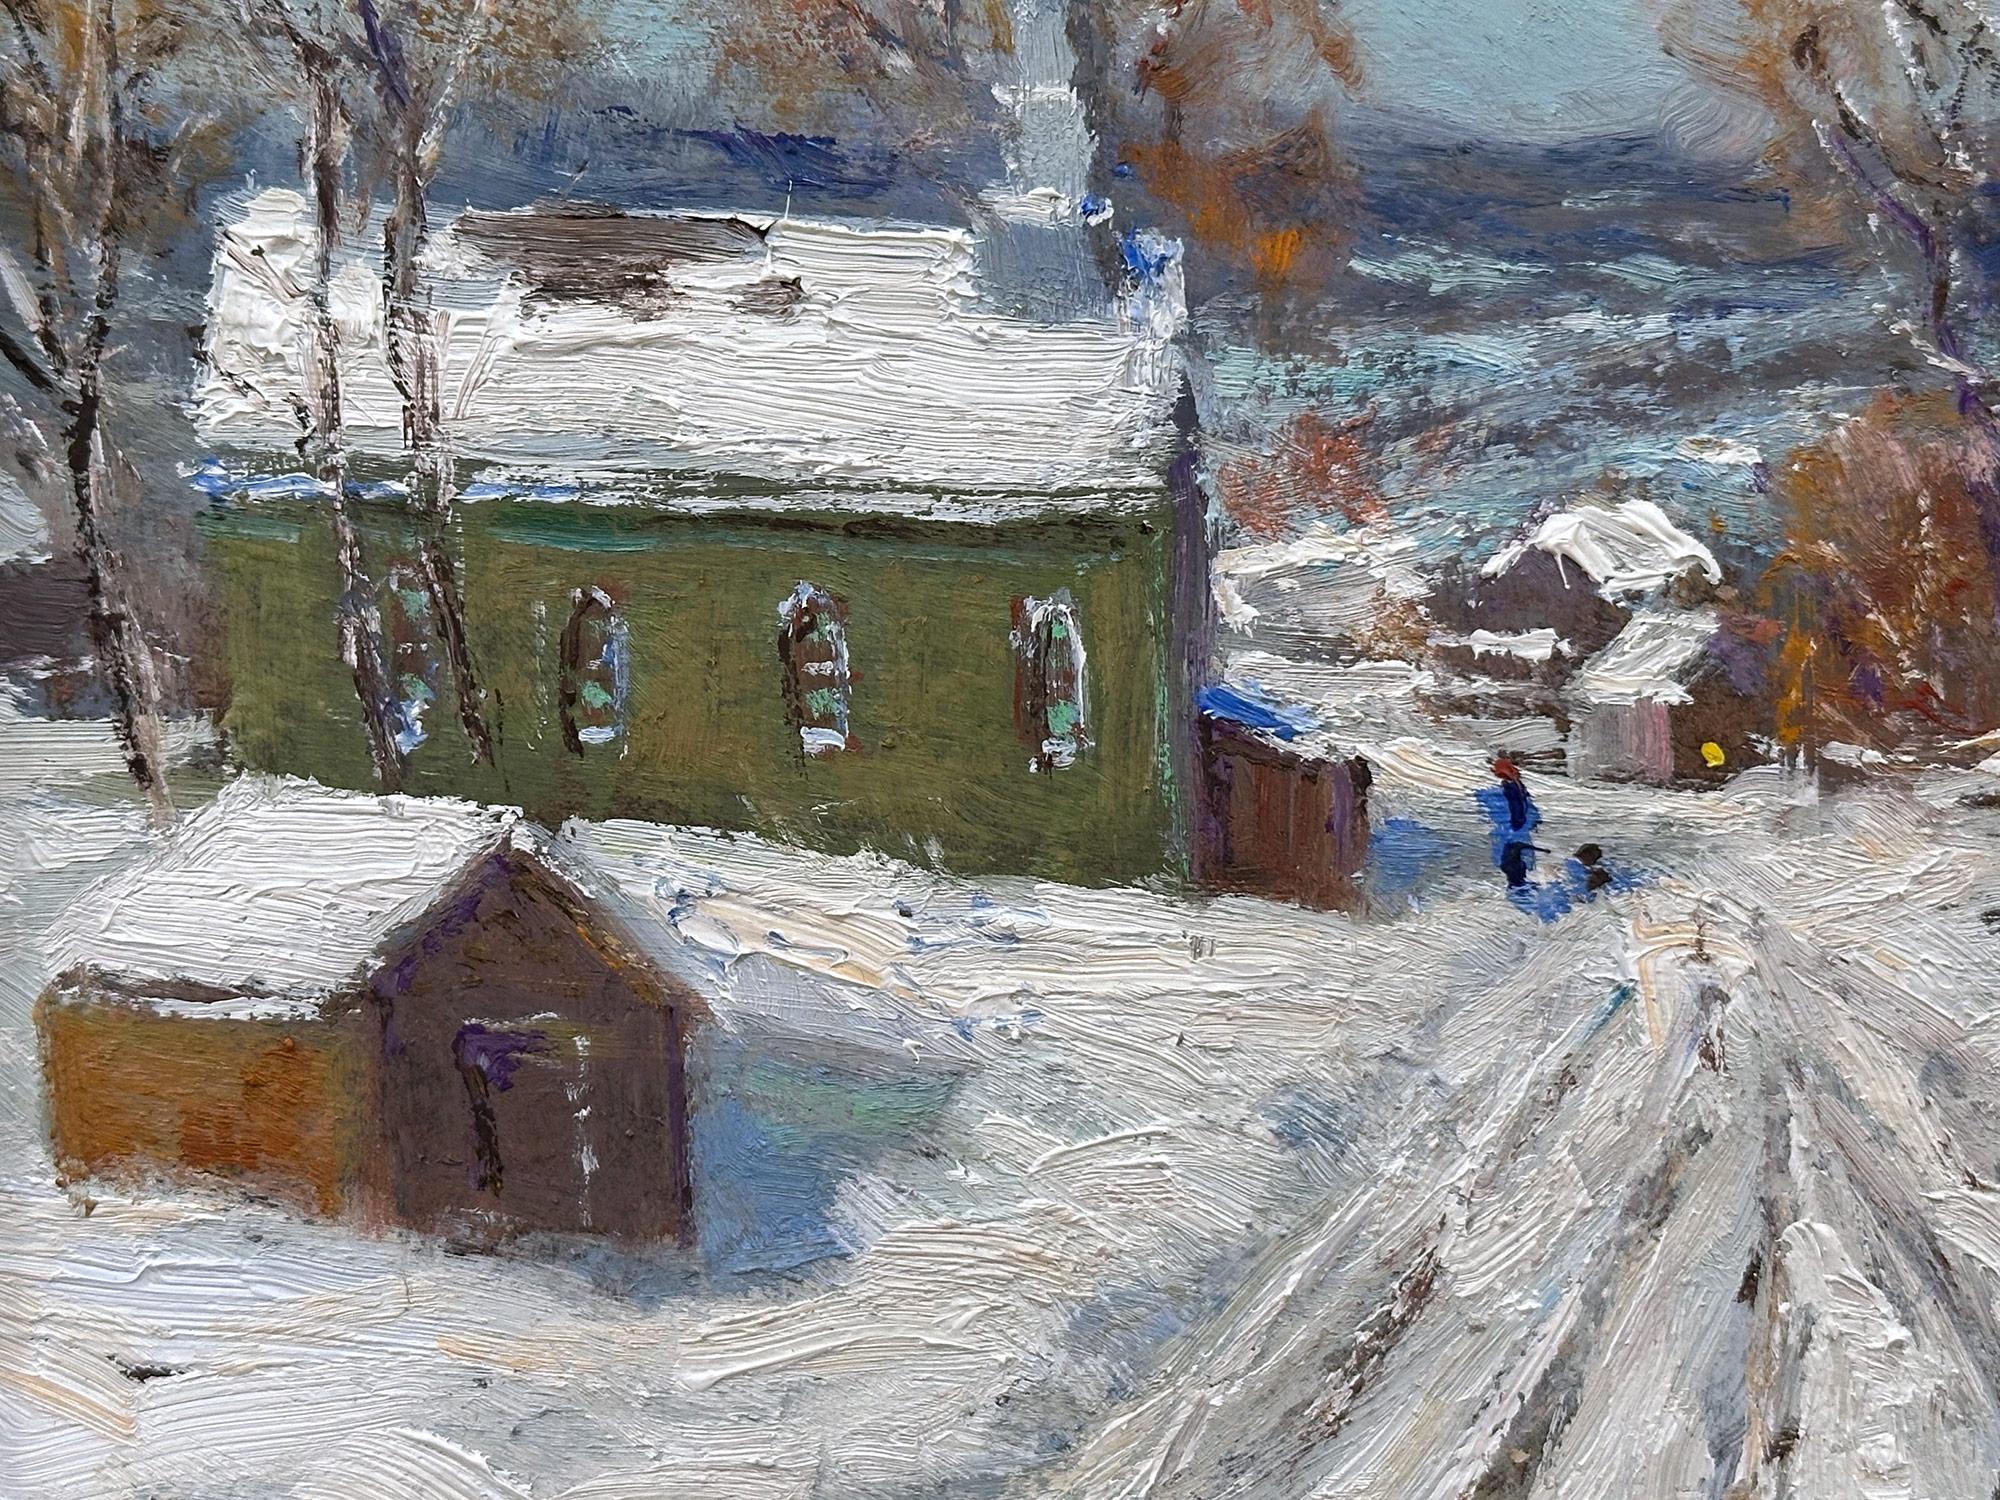 Impressionist winter pastoral scene of a quaint snow covered Church and farm houses near Tinicum, Bucks County, PA. Willet has portrayed this piece in a most intimate, yet energetic way, and has packed much feeling into this miniature work. It is